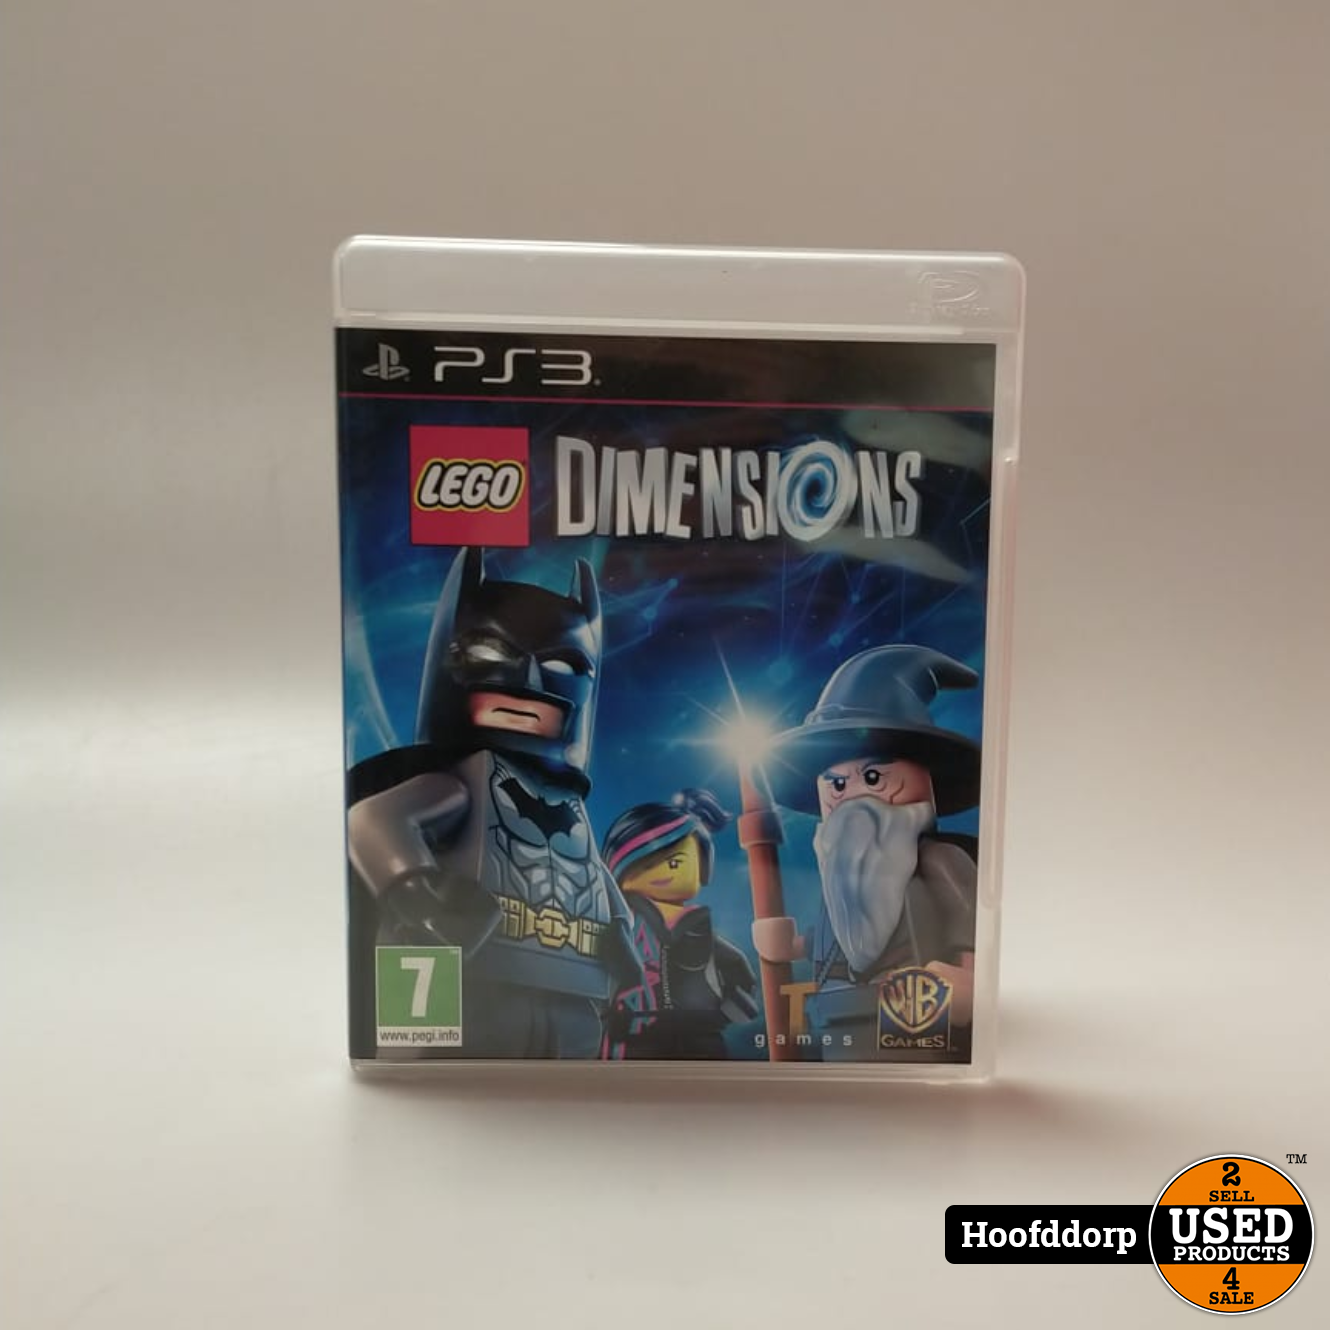 partitie Ongeldig gesloten Playstation 3 game: Lego Dimension - Used Products Hoofddorp